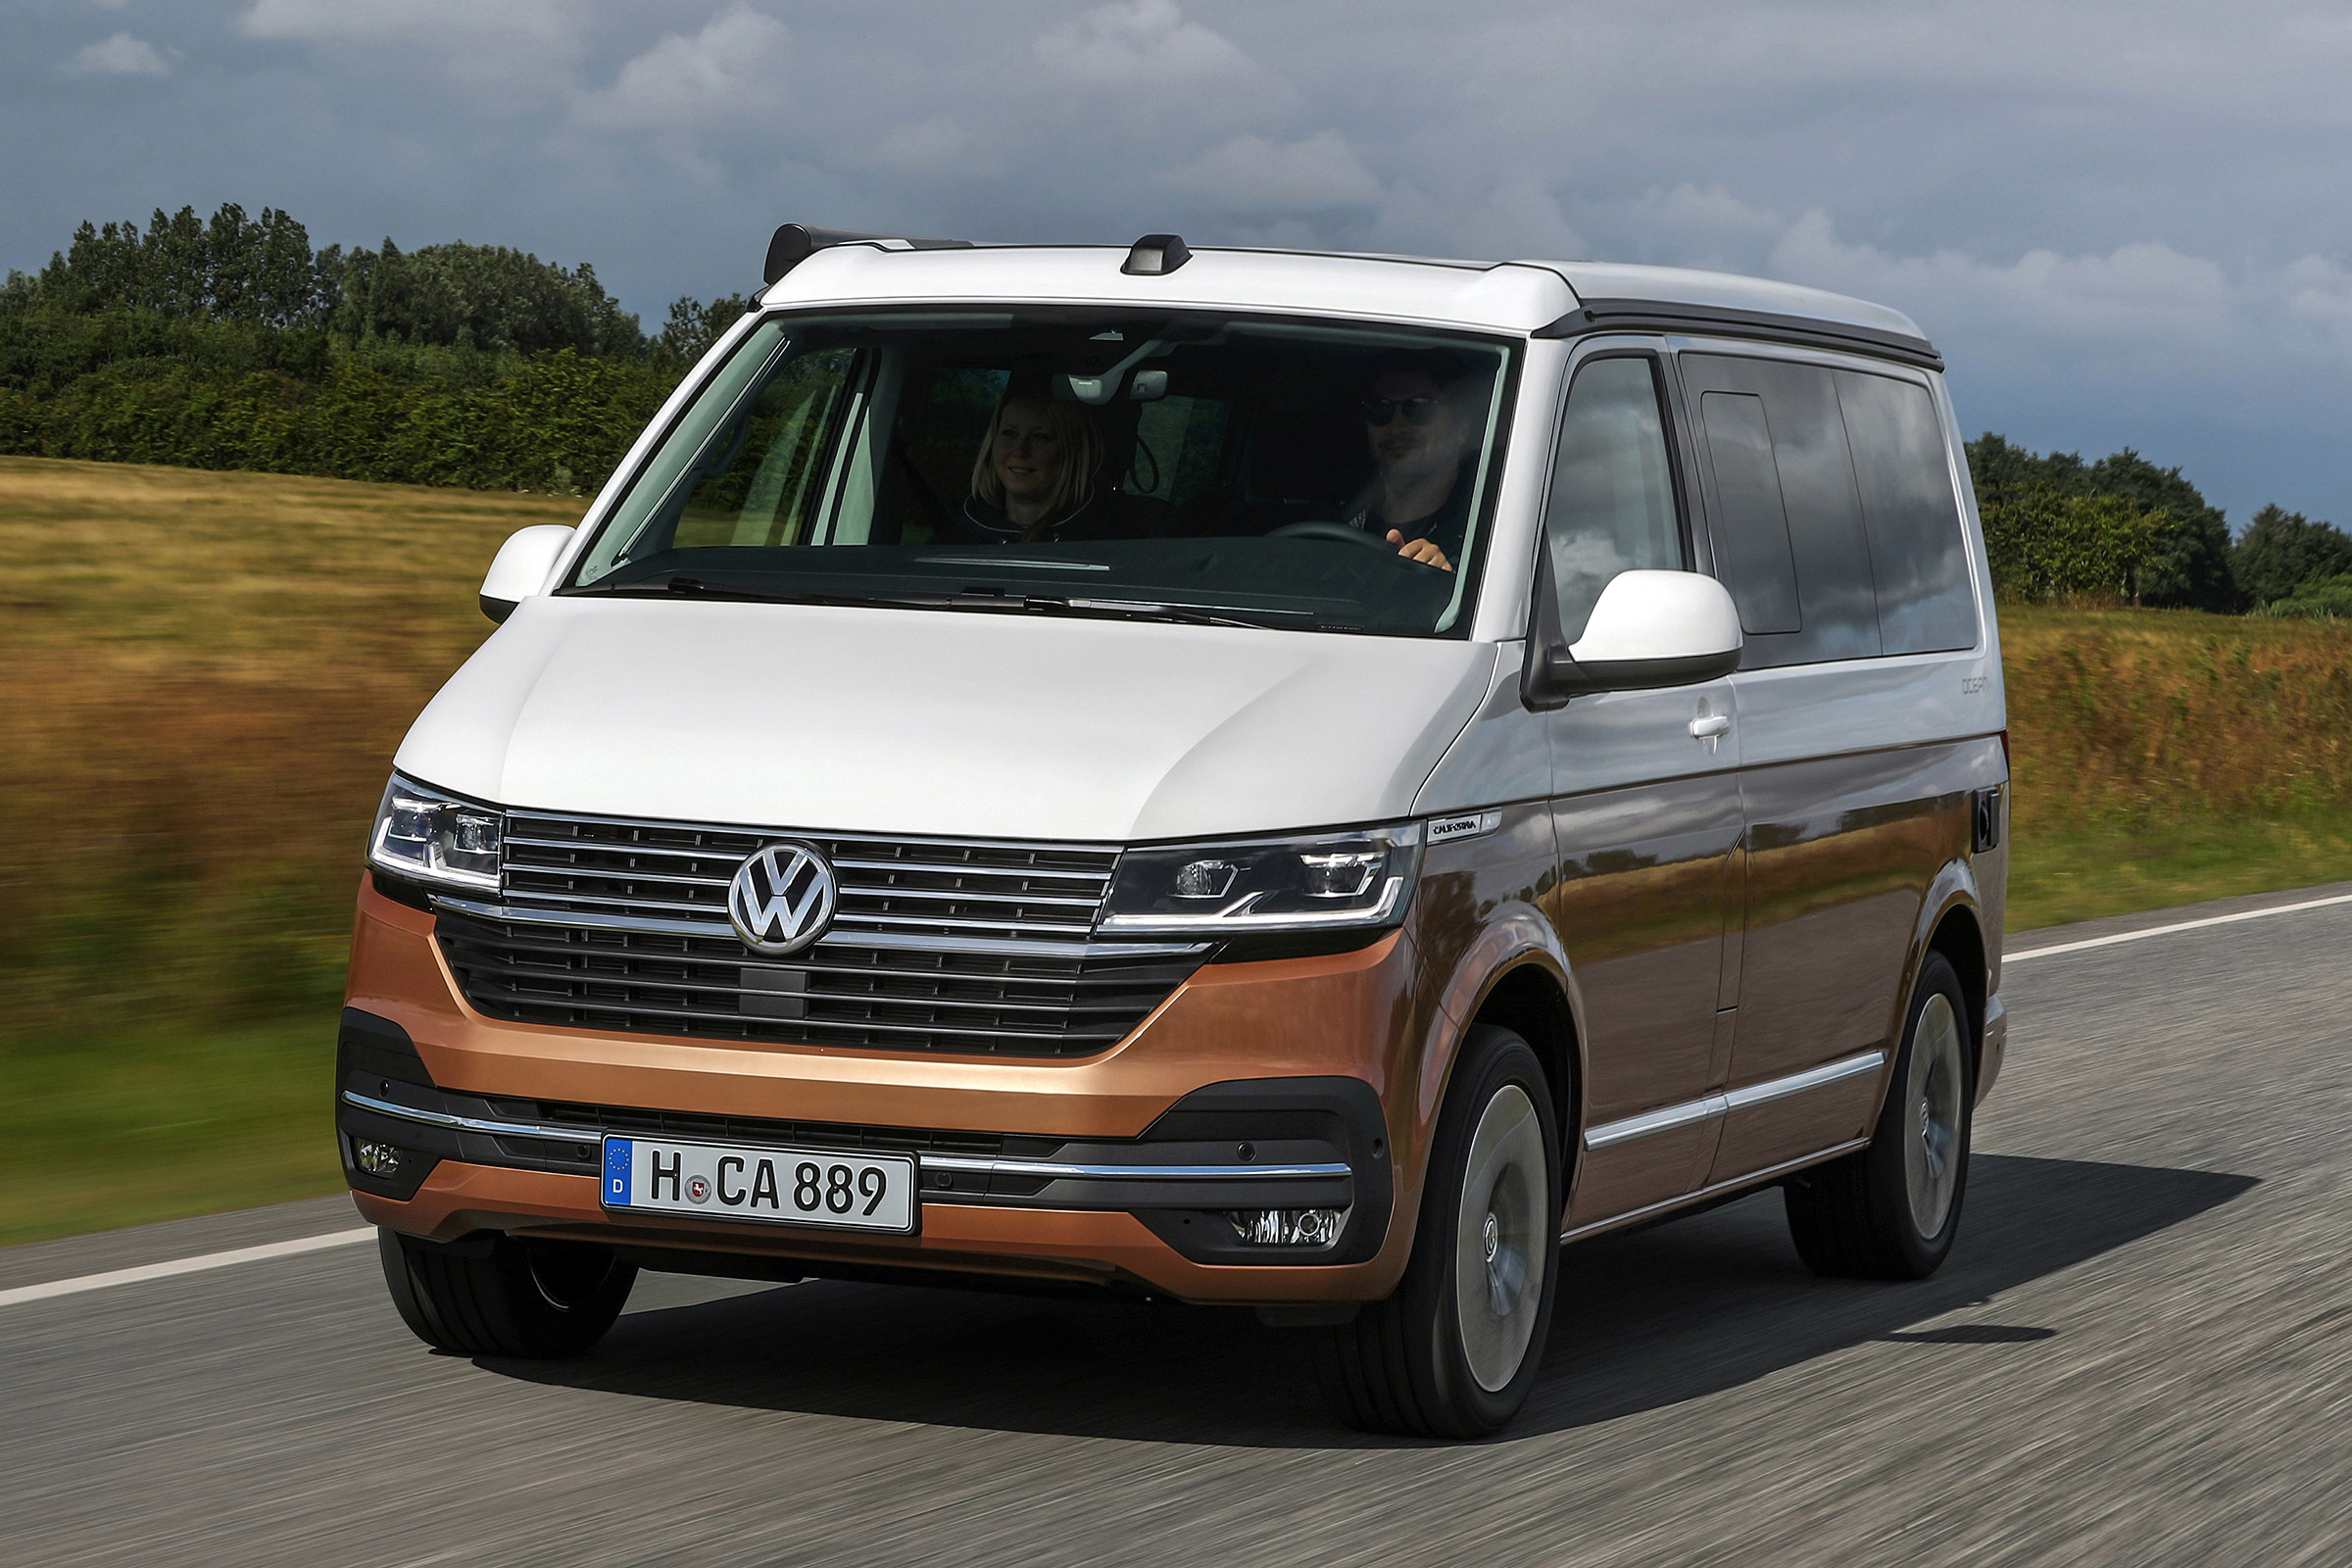 New Volkswagen California T6.1 revealed with updated look